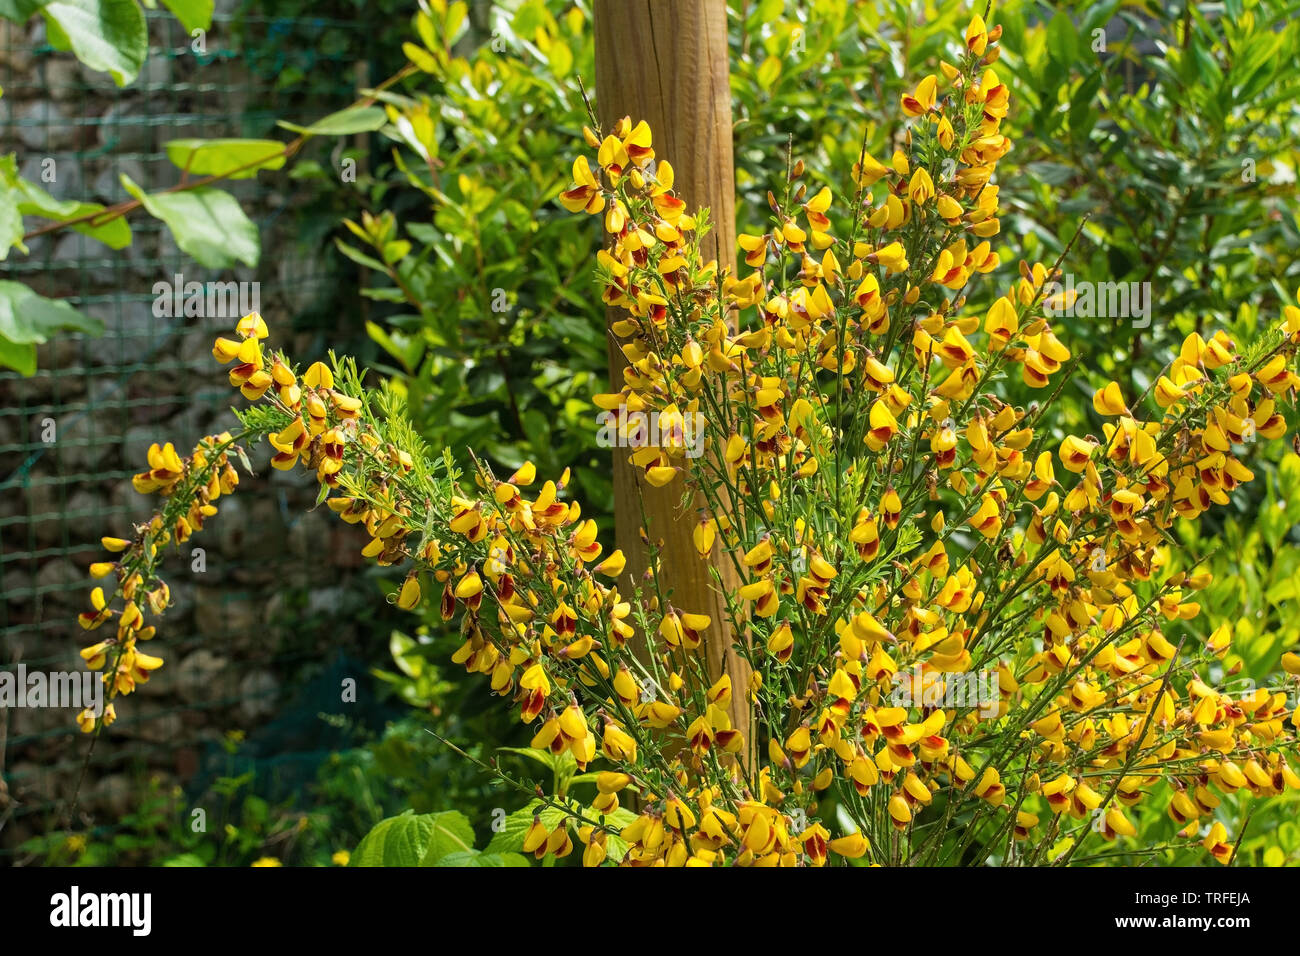 Yellow and red flowers on a Cytisus Scoparius, a perennial leguminous shrub also known as Common Broom, Scotch Broom and English Broom Stock Photo